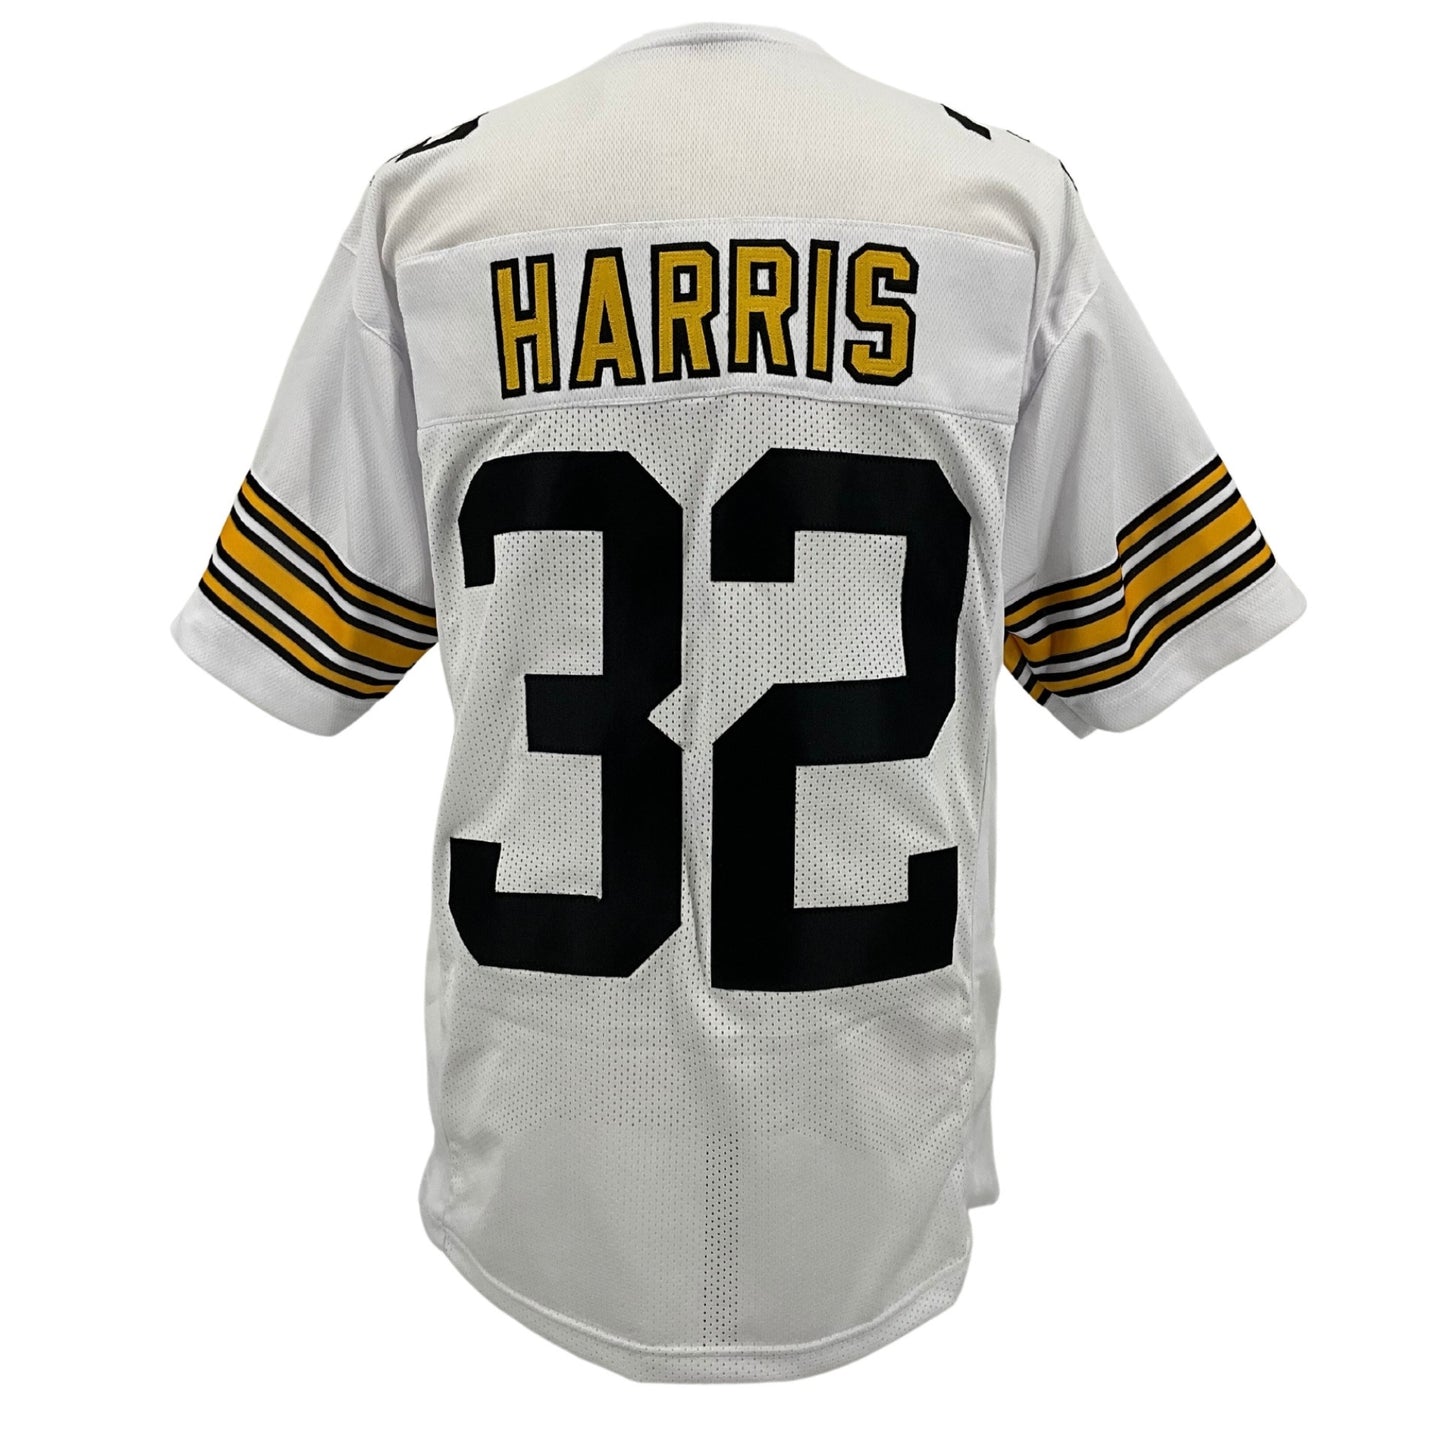 Franco Harris Jersey Old Number White Pittsburgh S-5XL Custom Sewn Stitch